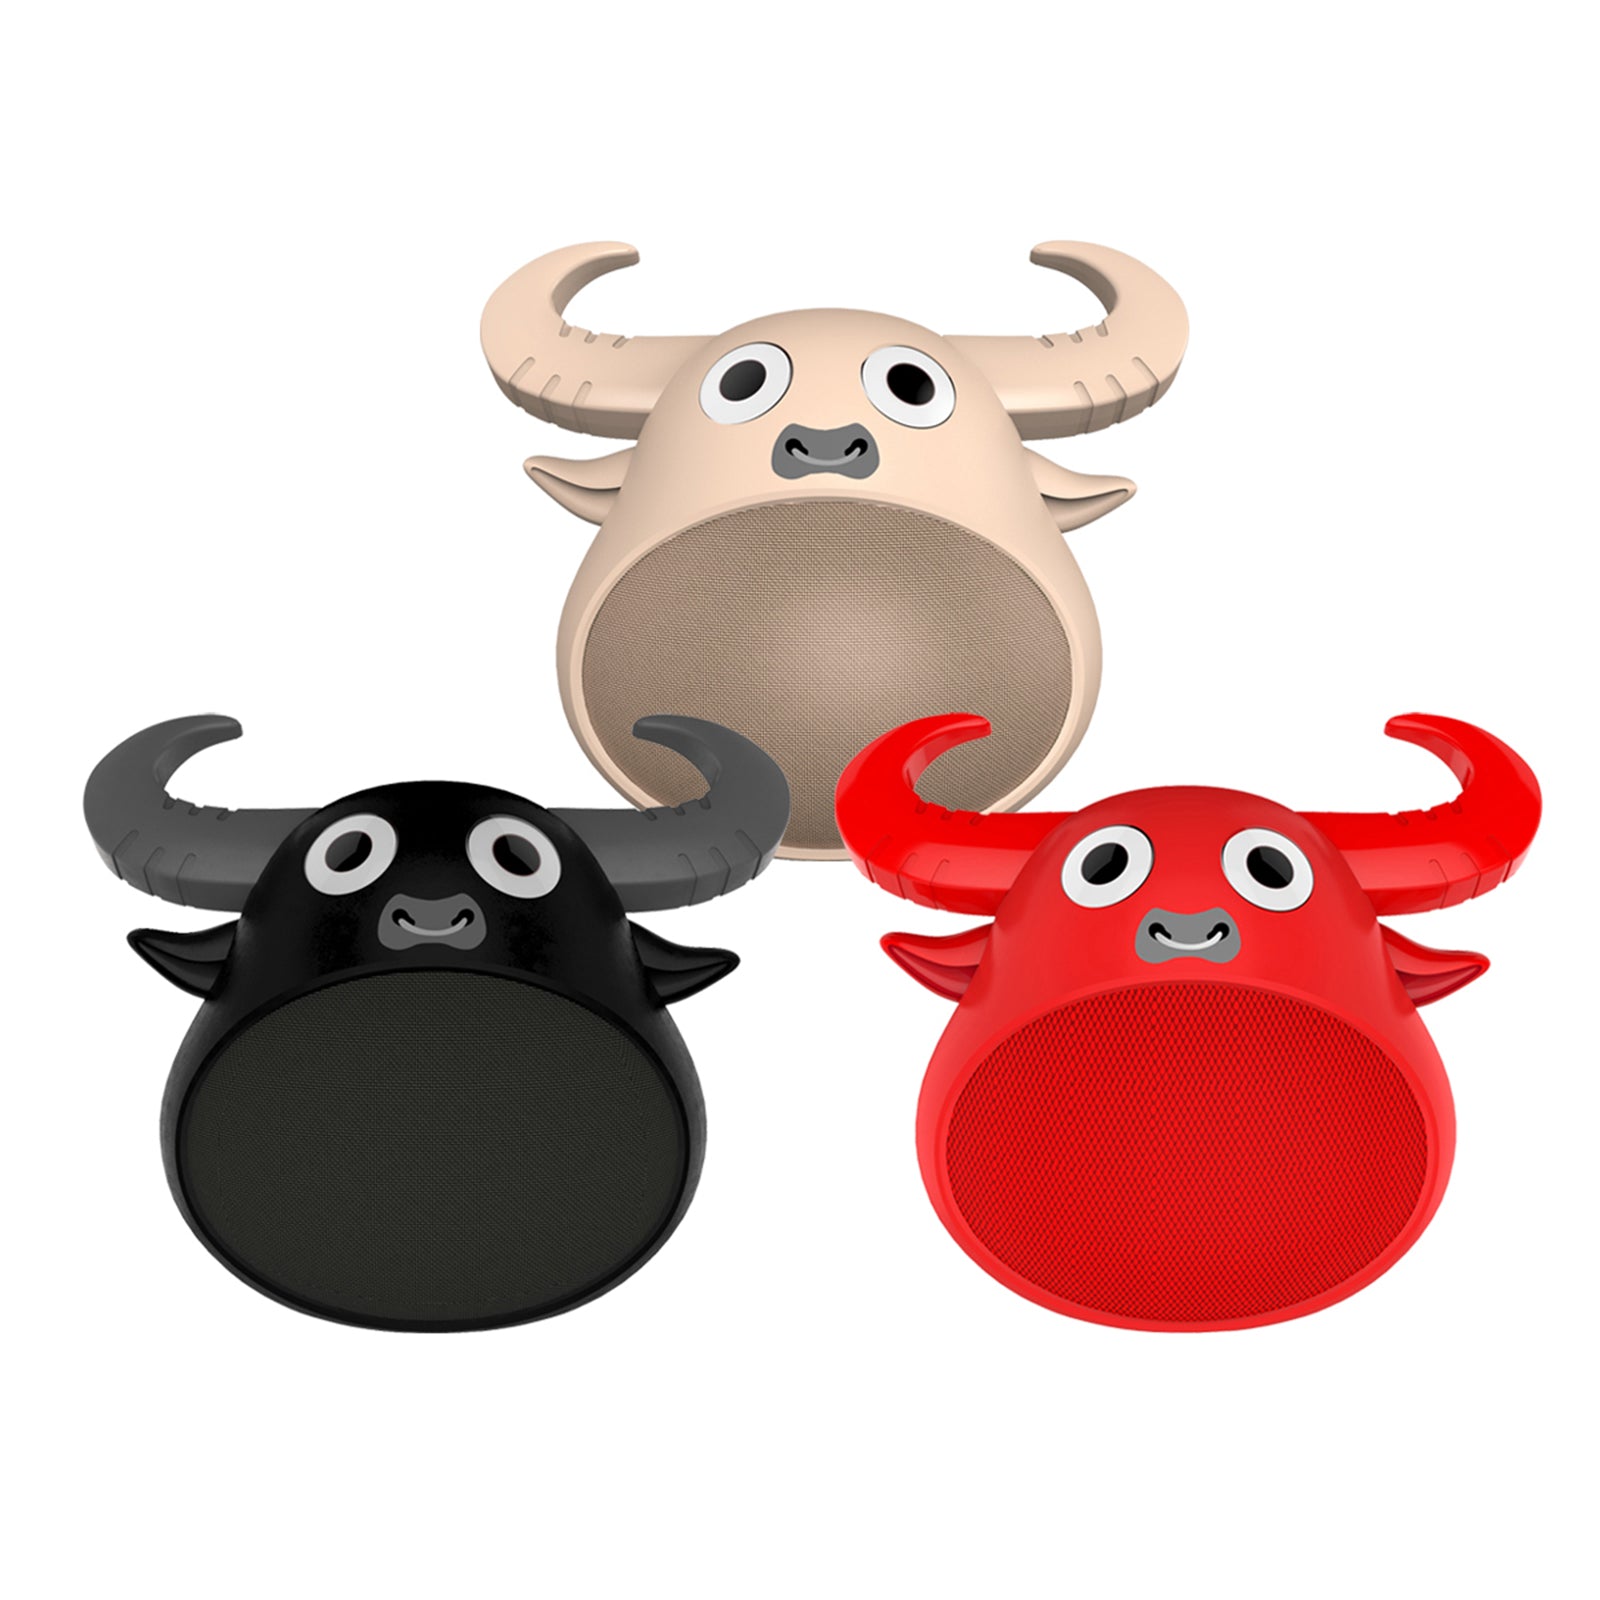 Fitsmart Bluetooth Animal Face Speaker Portable Wireless Stereo Sound - Red - SILBERSHELL